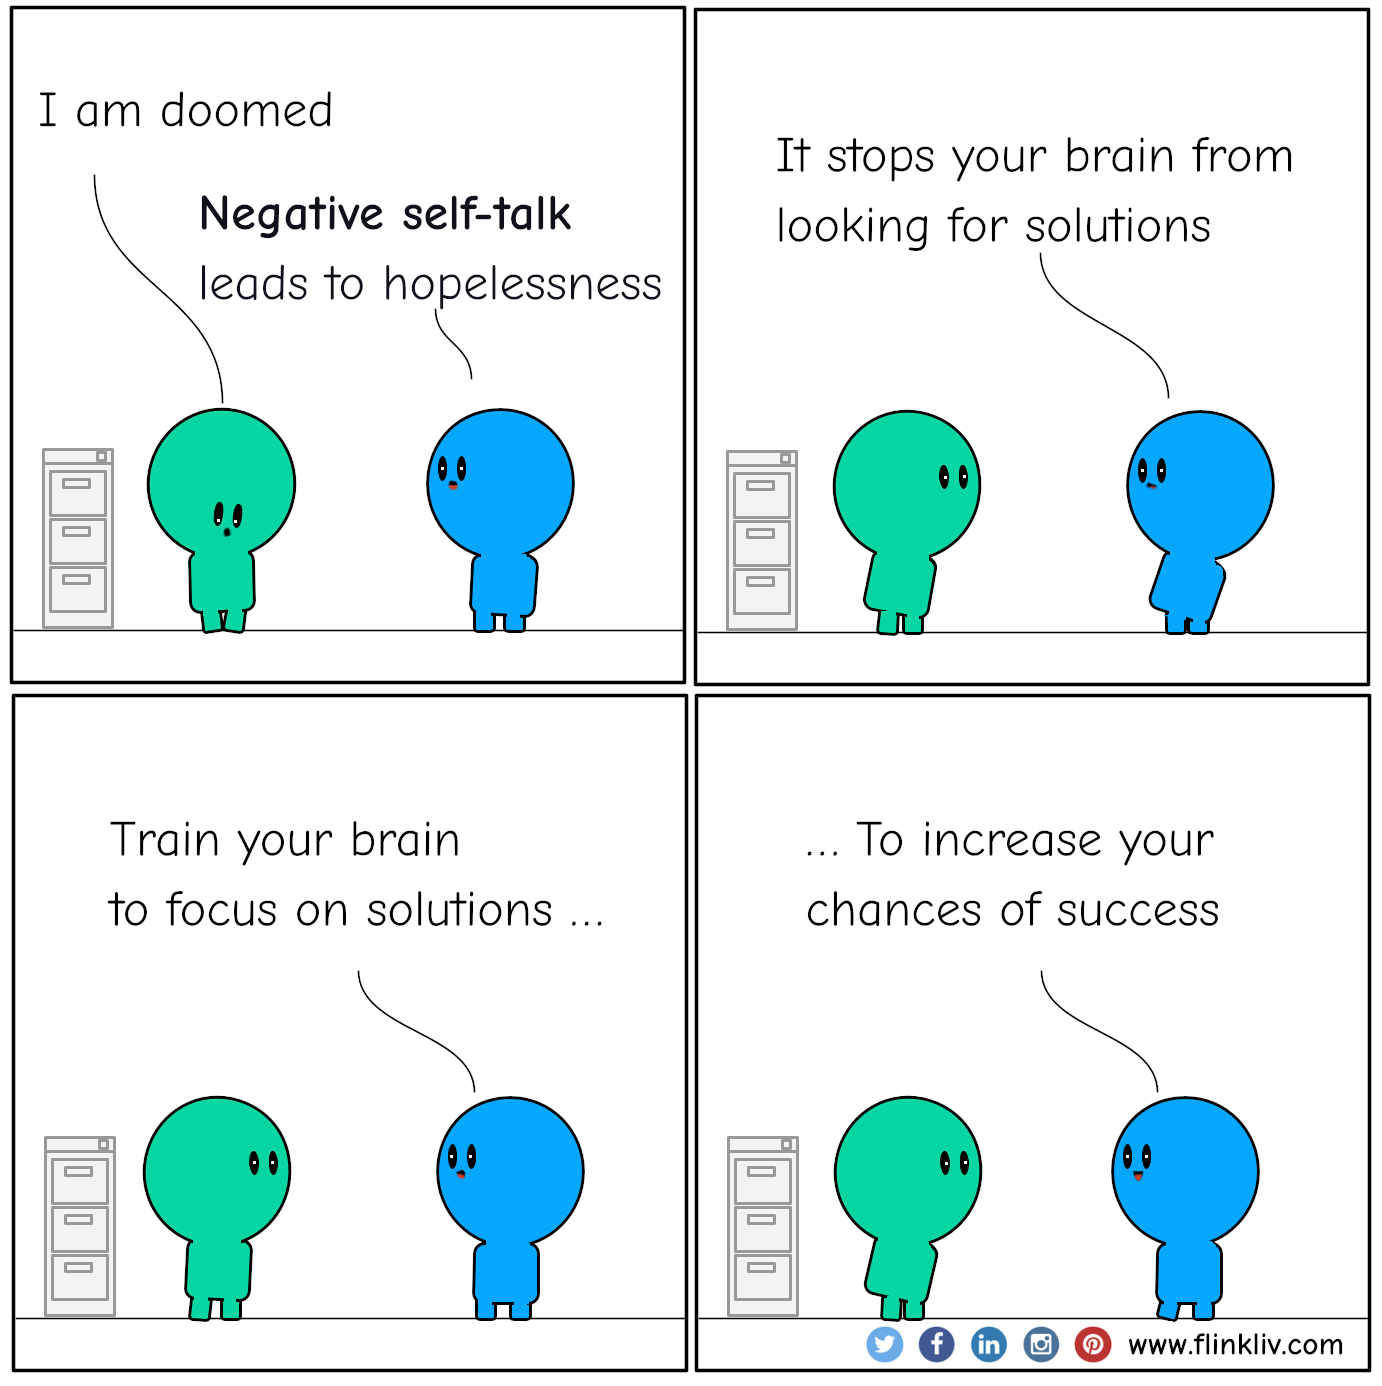 Conversation between A and B about avoiding negative self-talk.
				A: I am doomed.
				B: Negative self-talk leads to hopelessness
				B: Negative self-talk stops your brain from looking for solutions.
				B: Train your brain to focus on solutions to increase your chances of success.
				